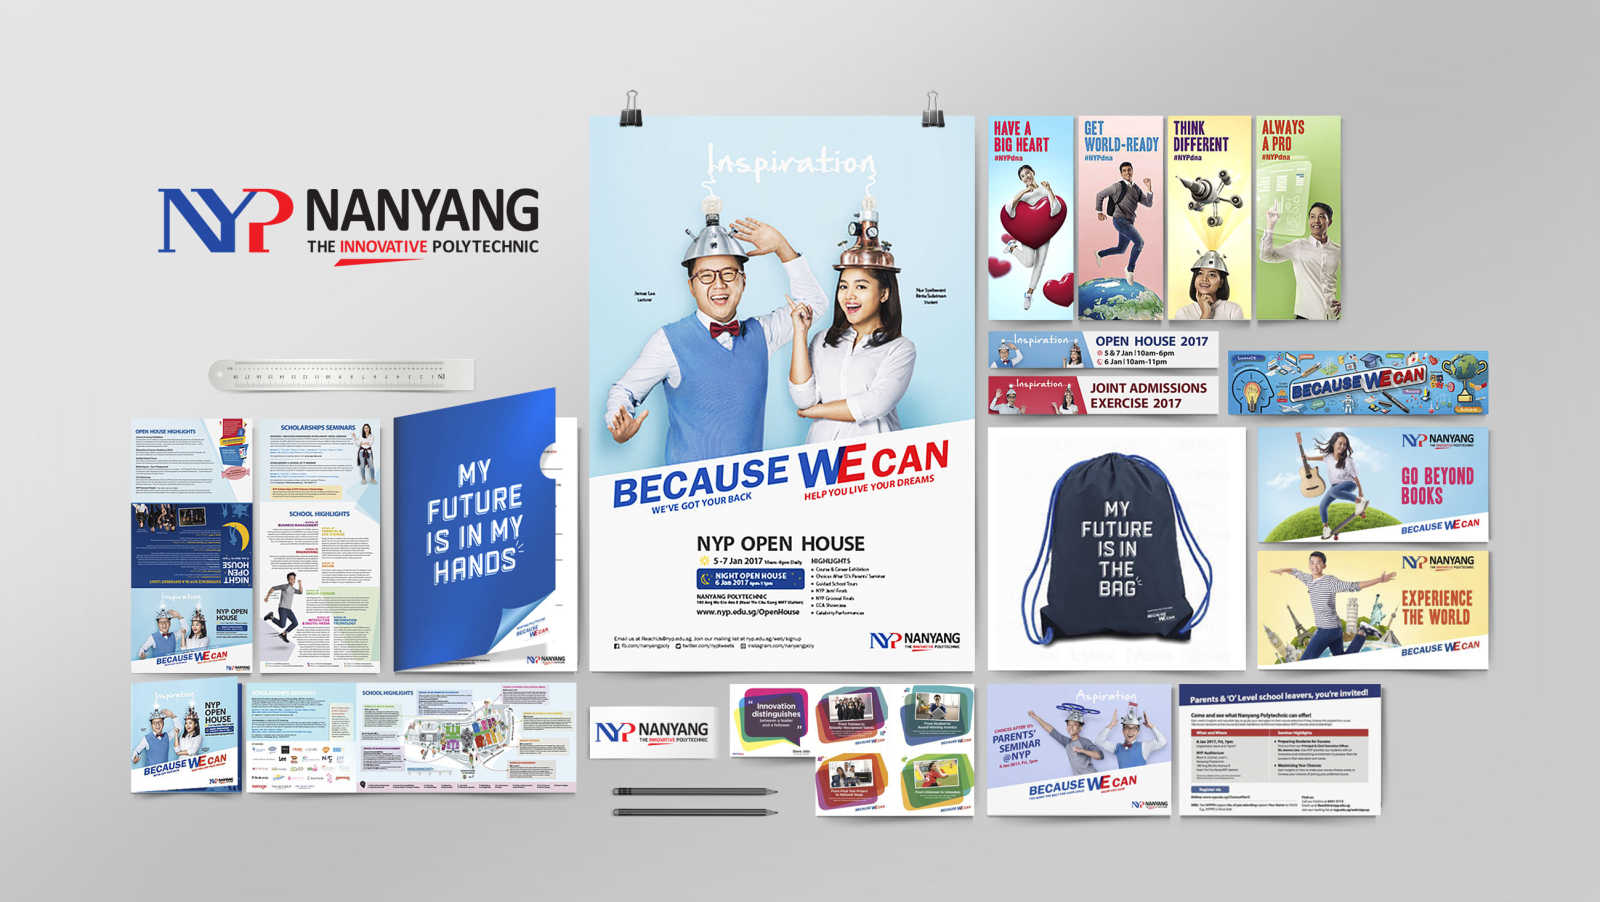 NYP “Because We Can” collateral design